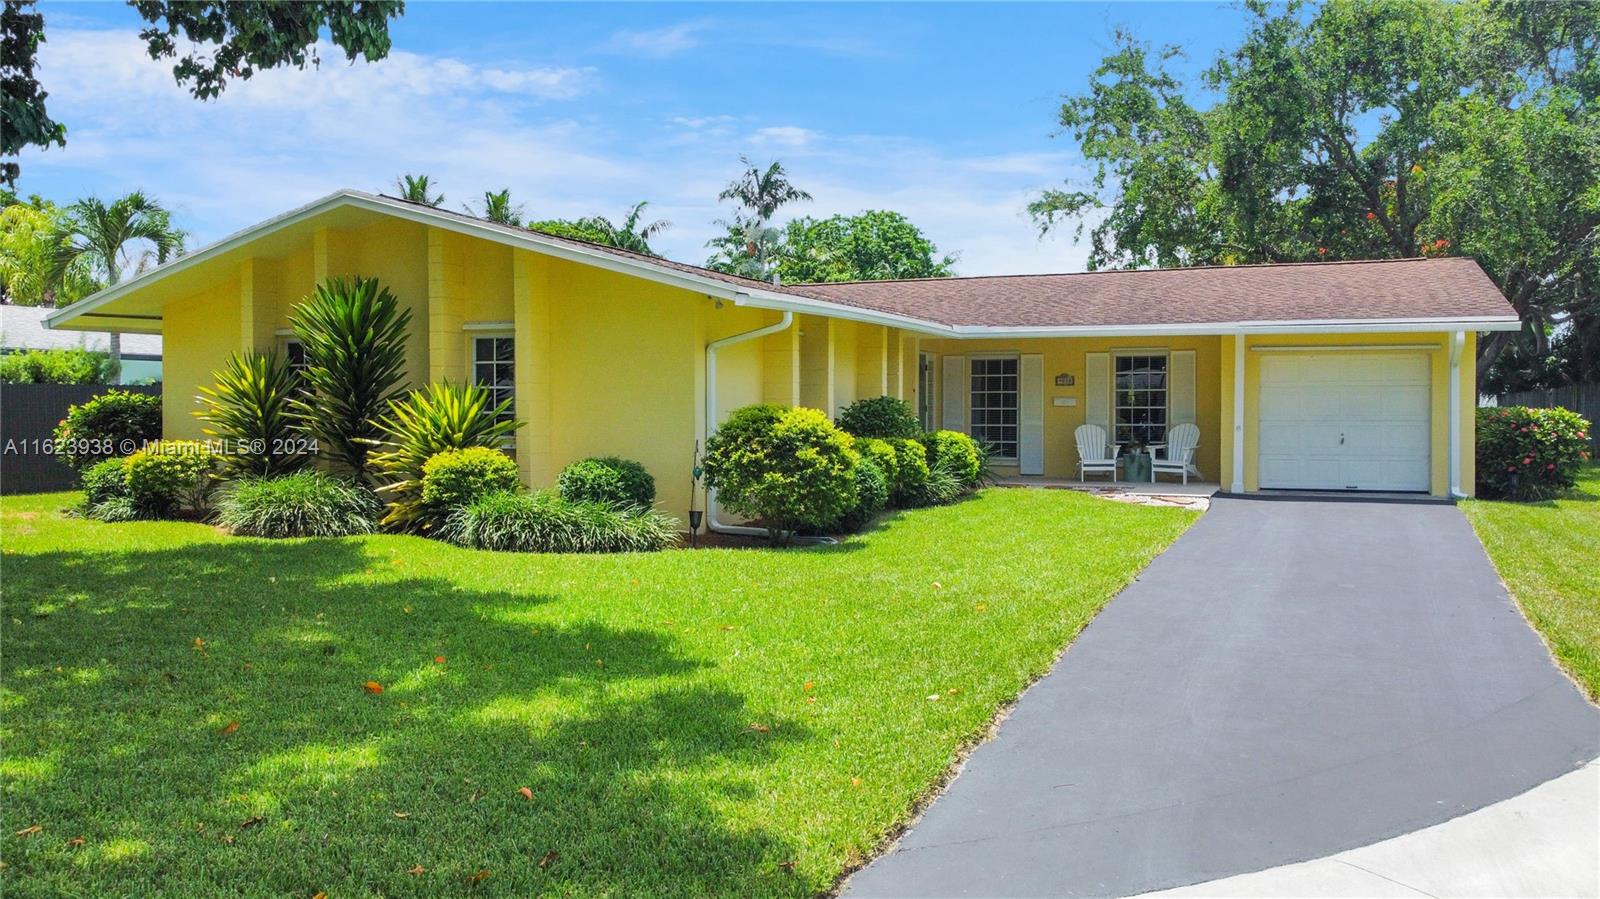 This stunning and beautifully decorated property is a charming gem nestled in a quiet cul-de-sac in the desirable neighborhood of Cutler Bay. This well-maintained home offers nearly 1,900 square feet of interior space, a galley kitchen with sleek stainless steel appliances, ceramic tile floors, and beautiful floor-to-ceiling plantation shutters in the living room, adding an elegant touch to the ambiance. Step outside to the covered patio, which provides ample space for both relaxing and dining while enjoying the serene surroundings. The expansive backyard offers plenty of room for a potential pool, while being enveloped by the tranquility of hundred-year-old trees. This property is a perfect blend of modern comforts and timeless charm, offering a peaceful retreat in a picturesque setting.